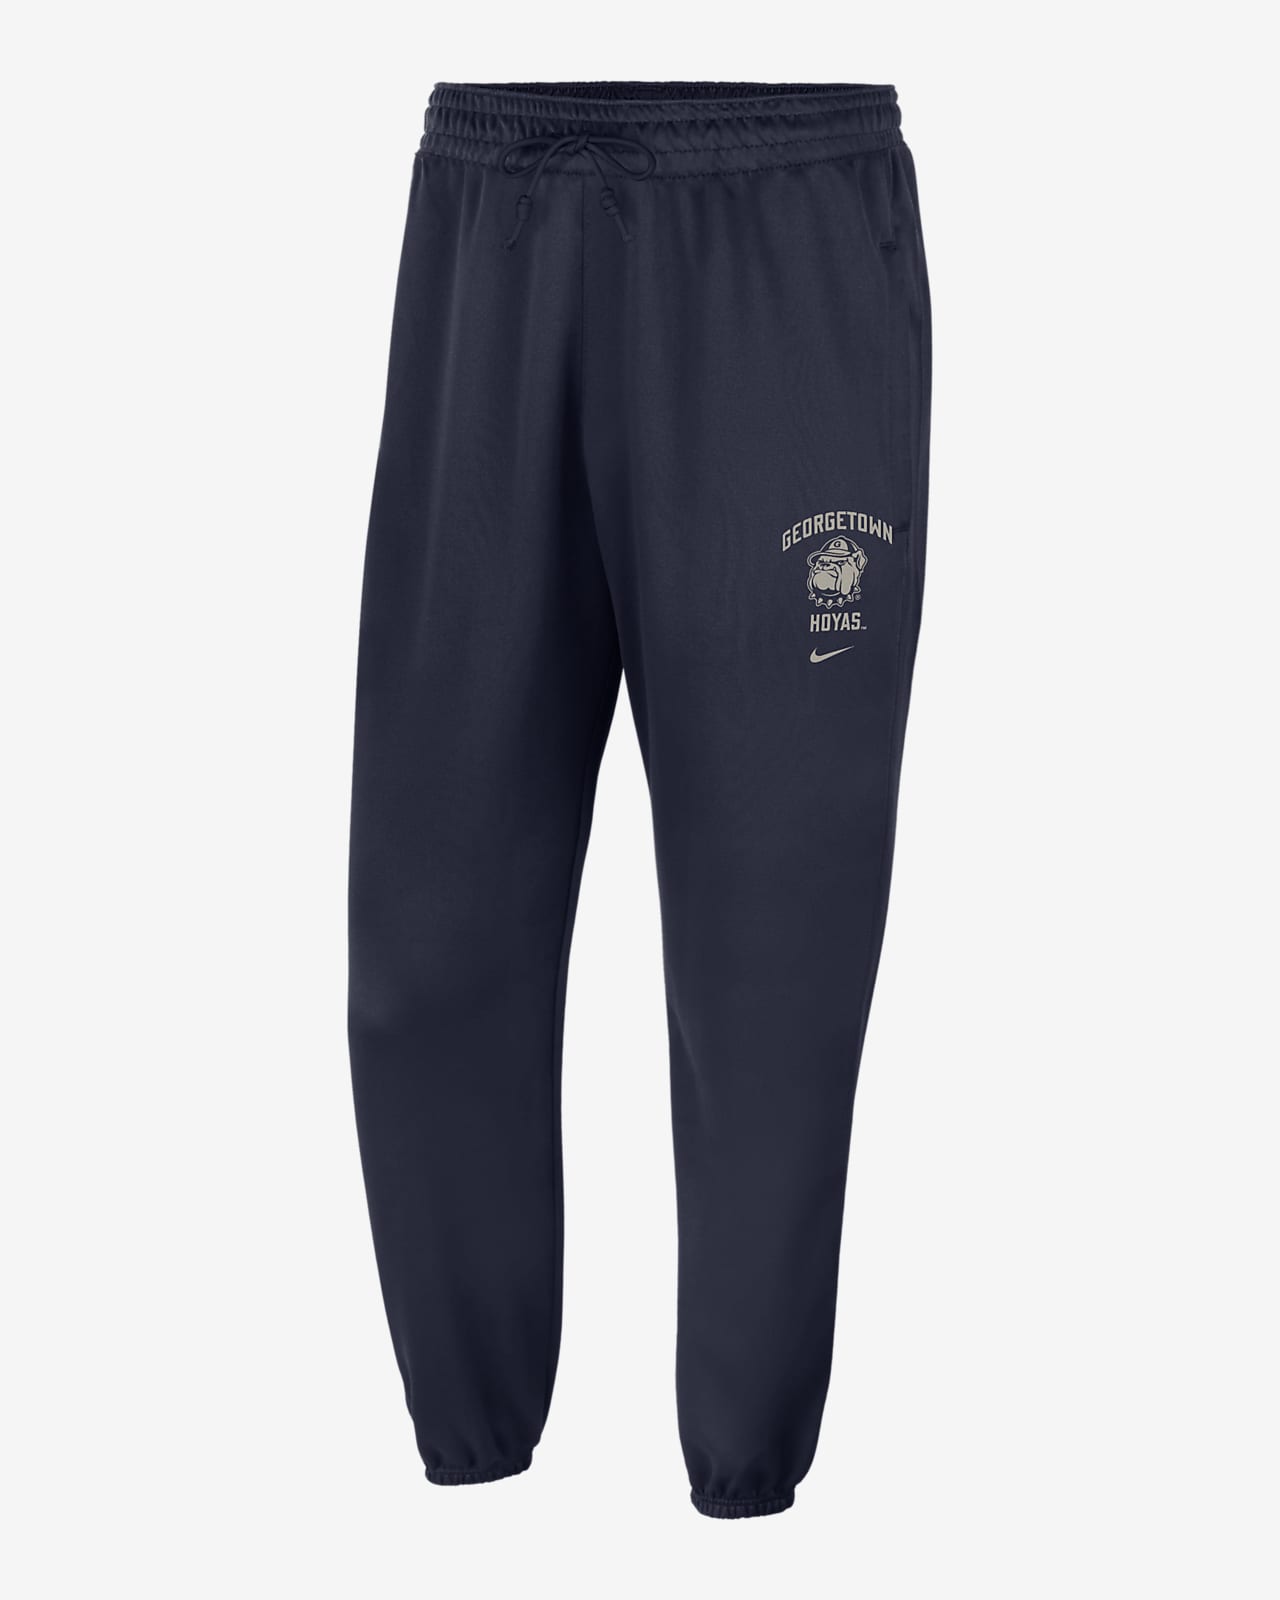 Georgetown Standard Issue Men's Nike College Joggers